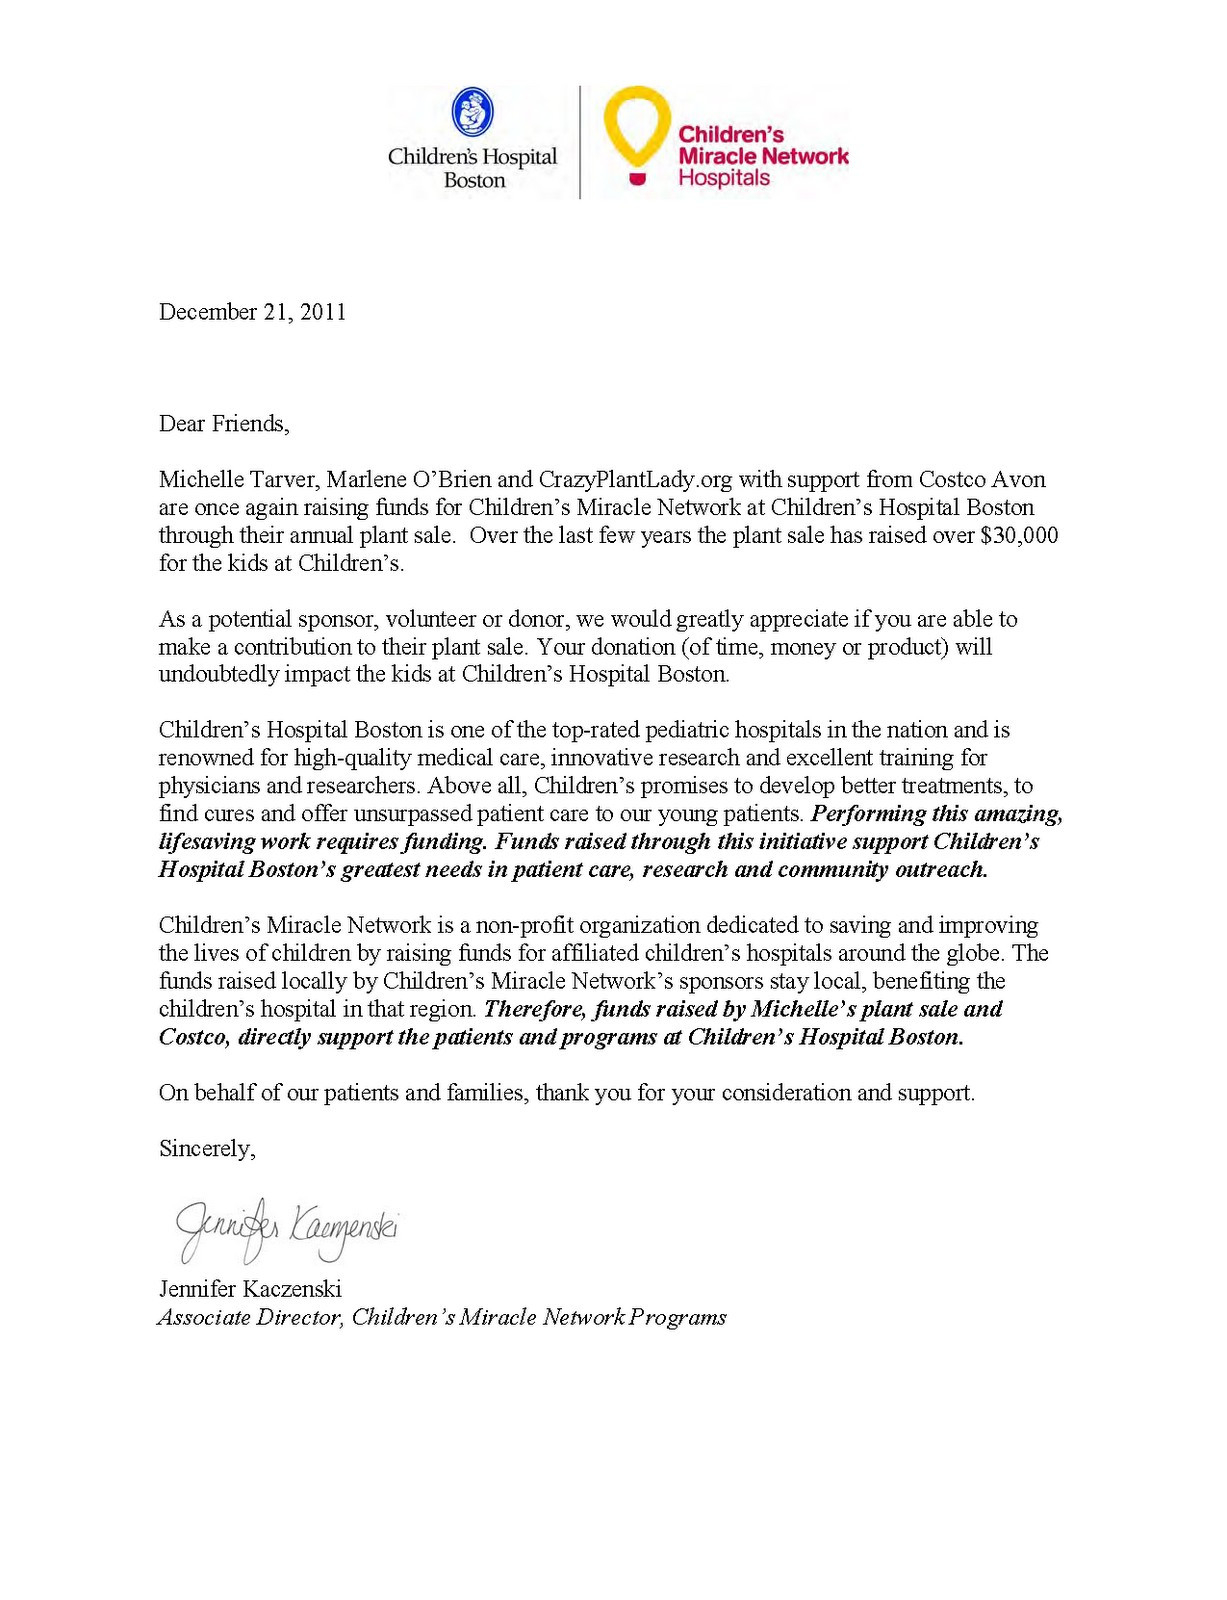 Solicitation Letter Template - Phenomenal Christmas Letter to Donors